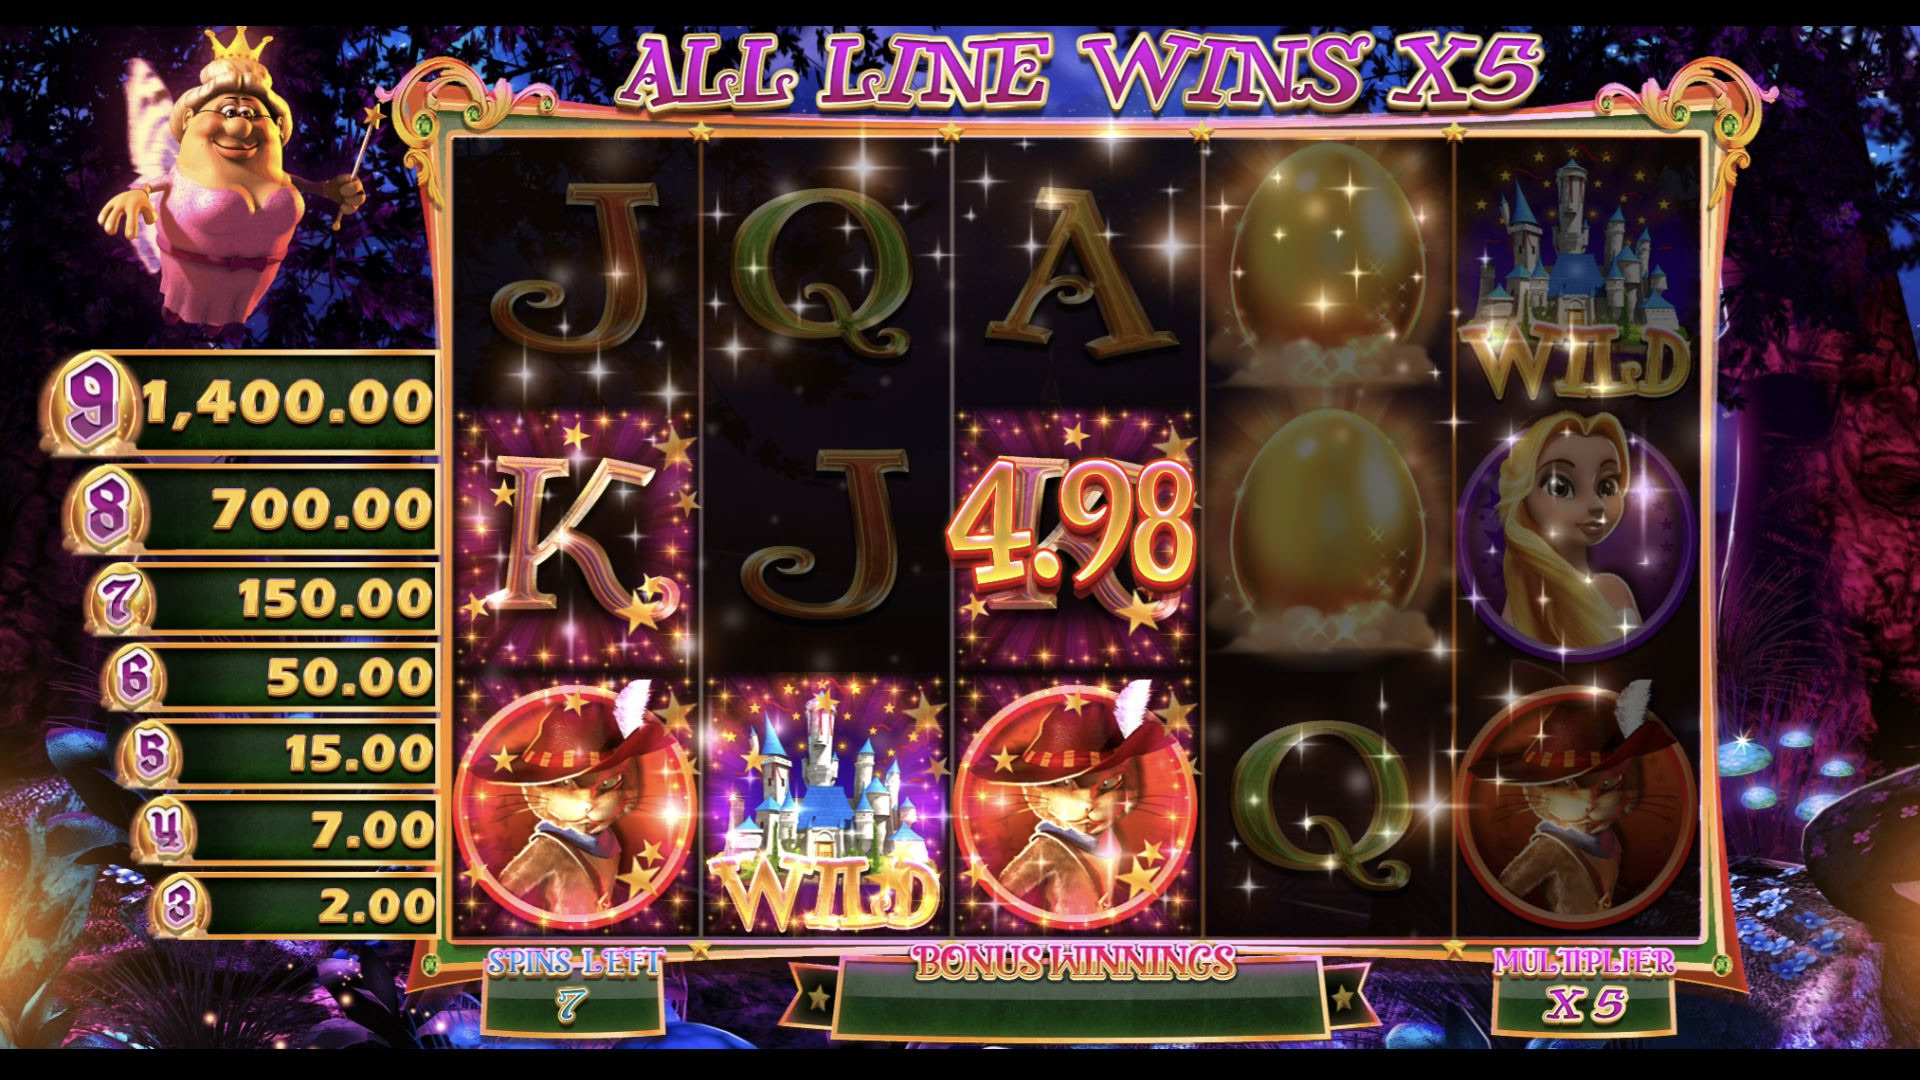 Wish Upon a Cashpot is a 5x3, 20-payline video slot that incorporates the Cashpot mechanic that offers instant prizes.